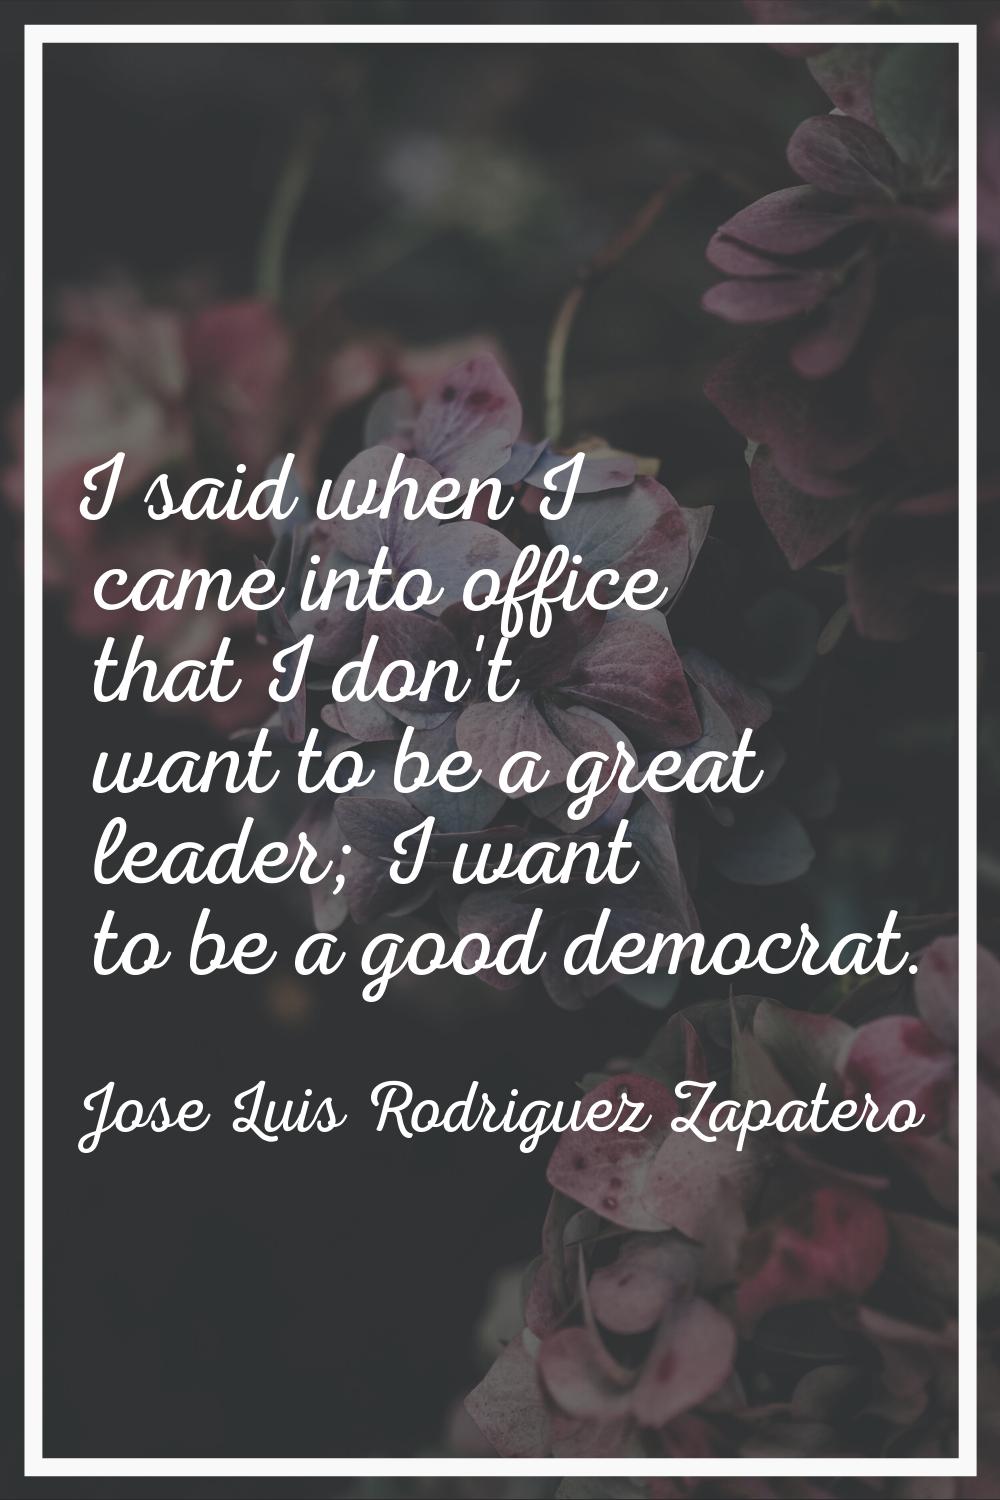 I said when I came into office that I don't want to be a great leader; I want to be a good democrat